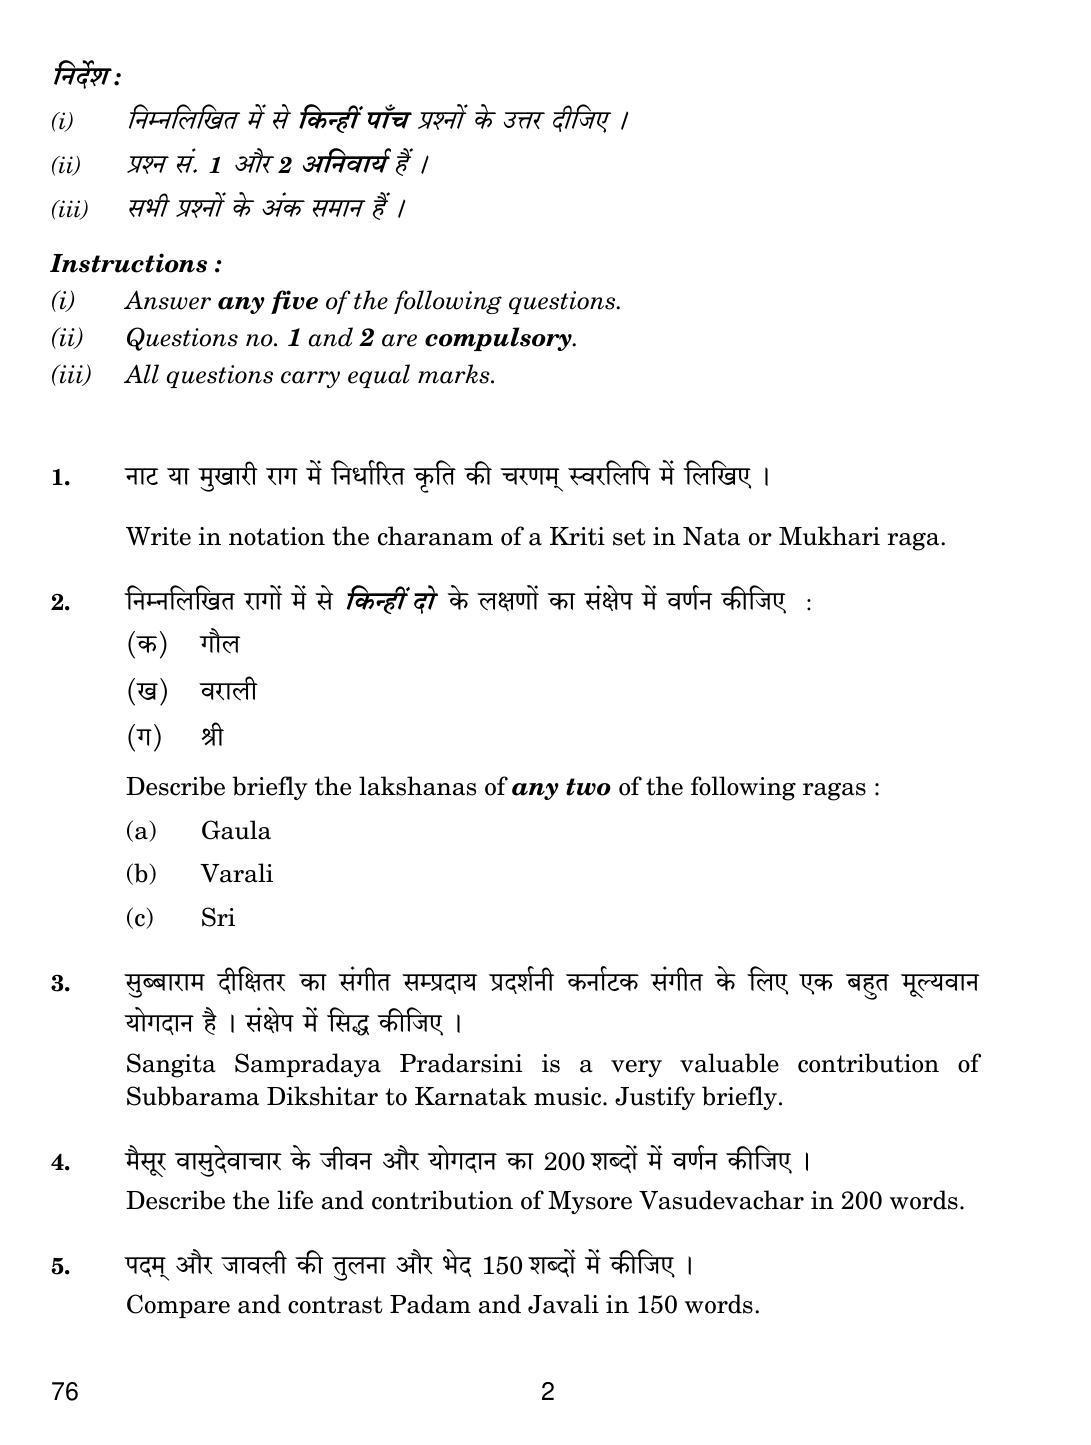 CBSE Class 12 76 Carnatic Music 2019 Question Paper - Page 2